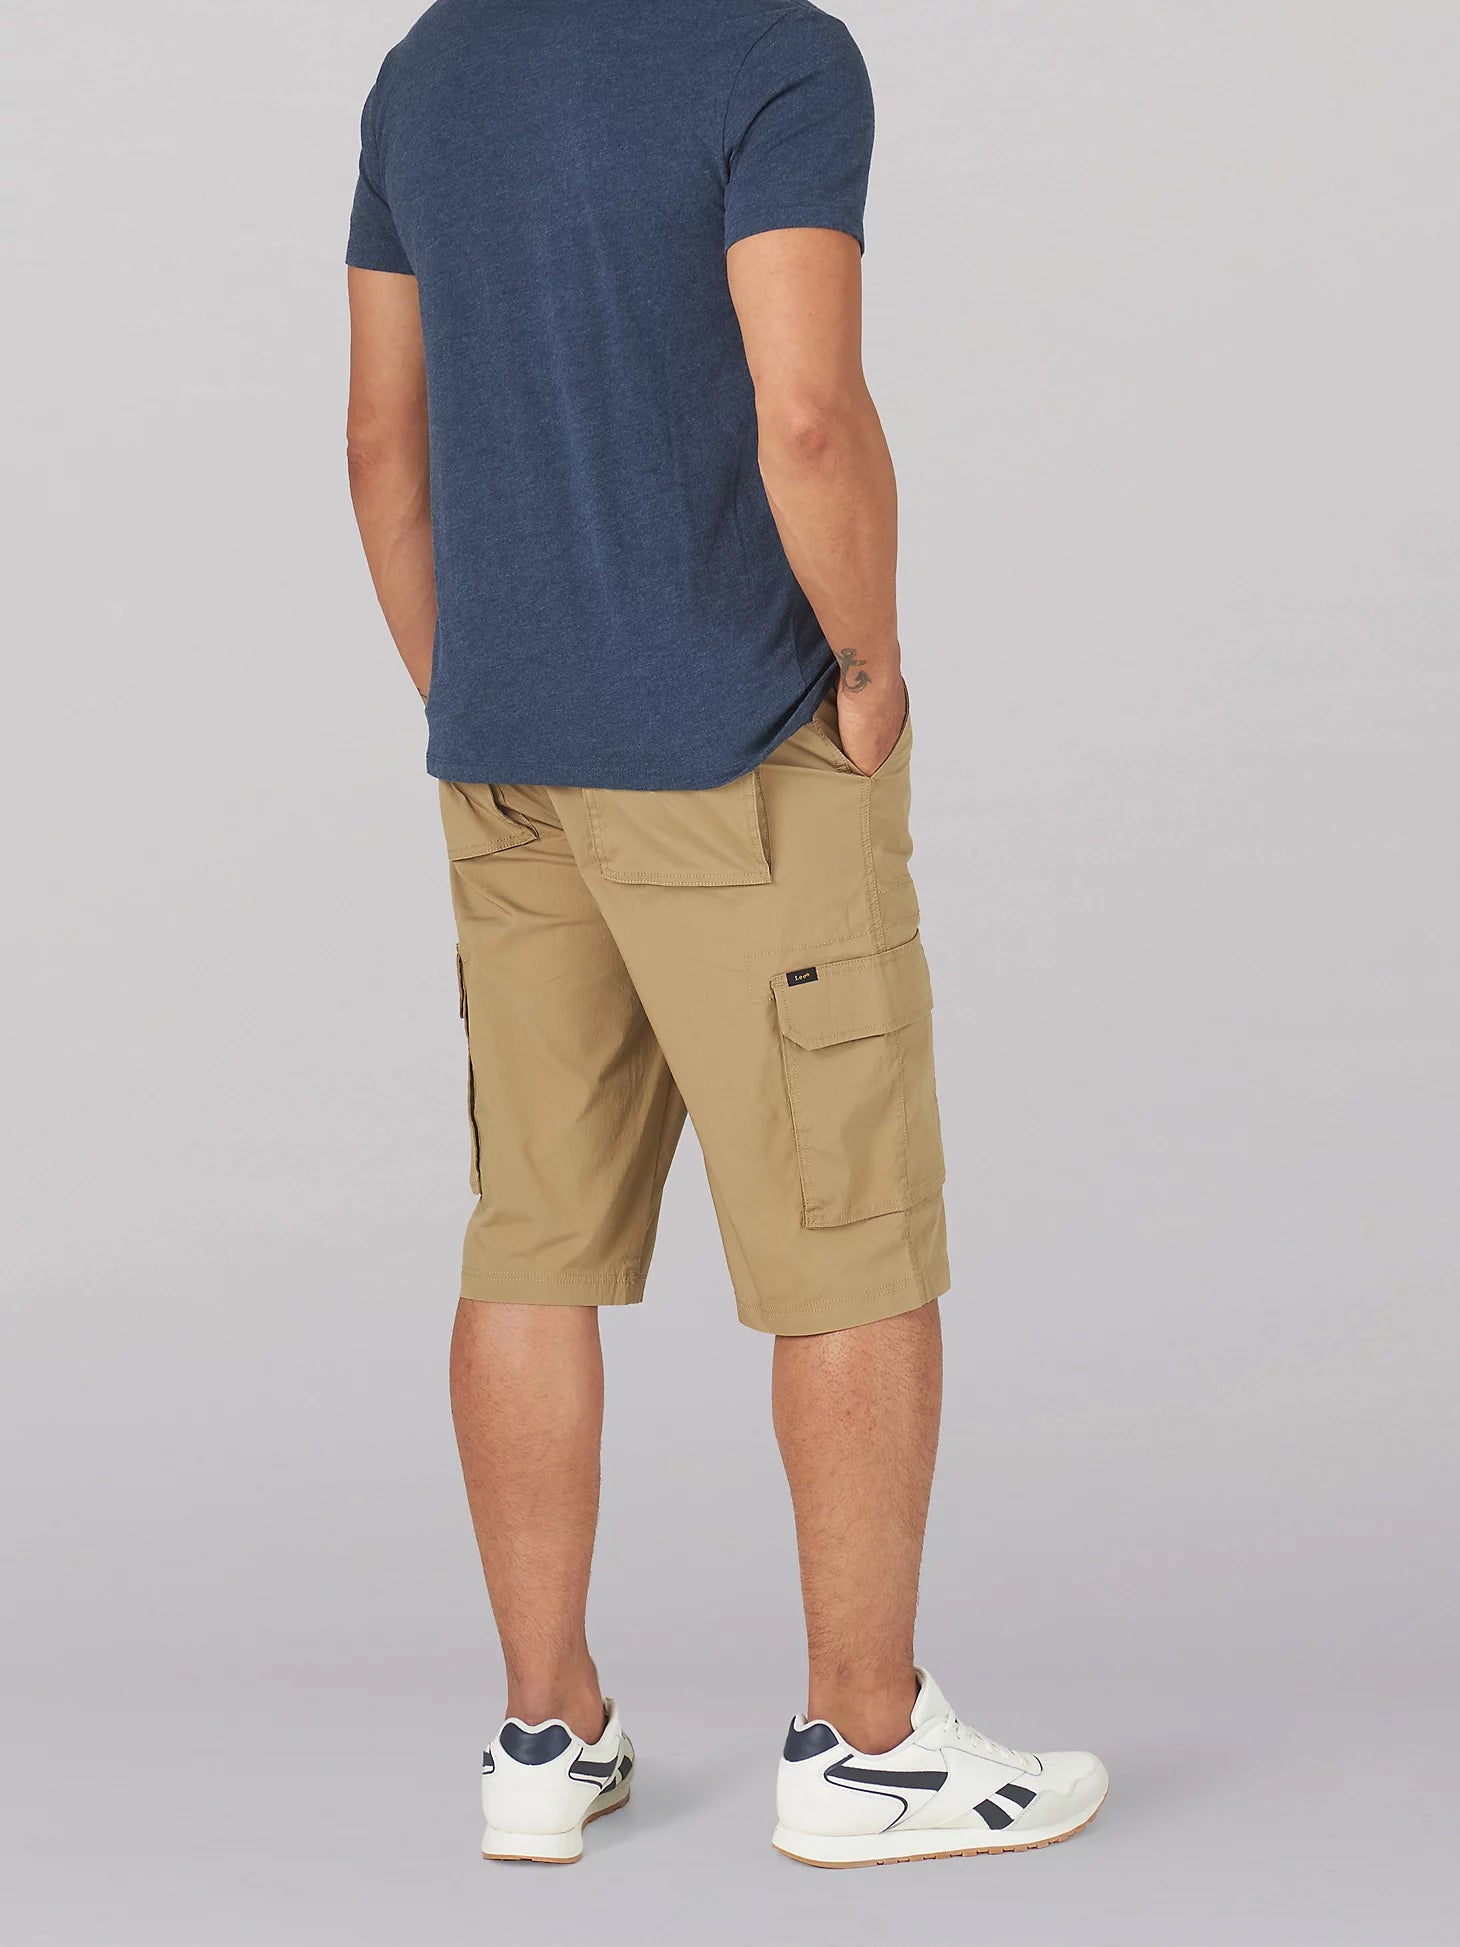 Lee 2314313 Extreme Motion Cameron Relaxed Cargo Shorts in KC Khaki Back View